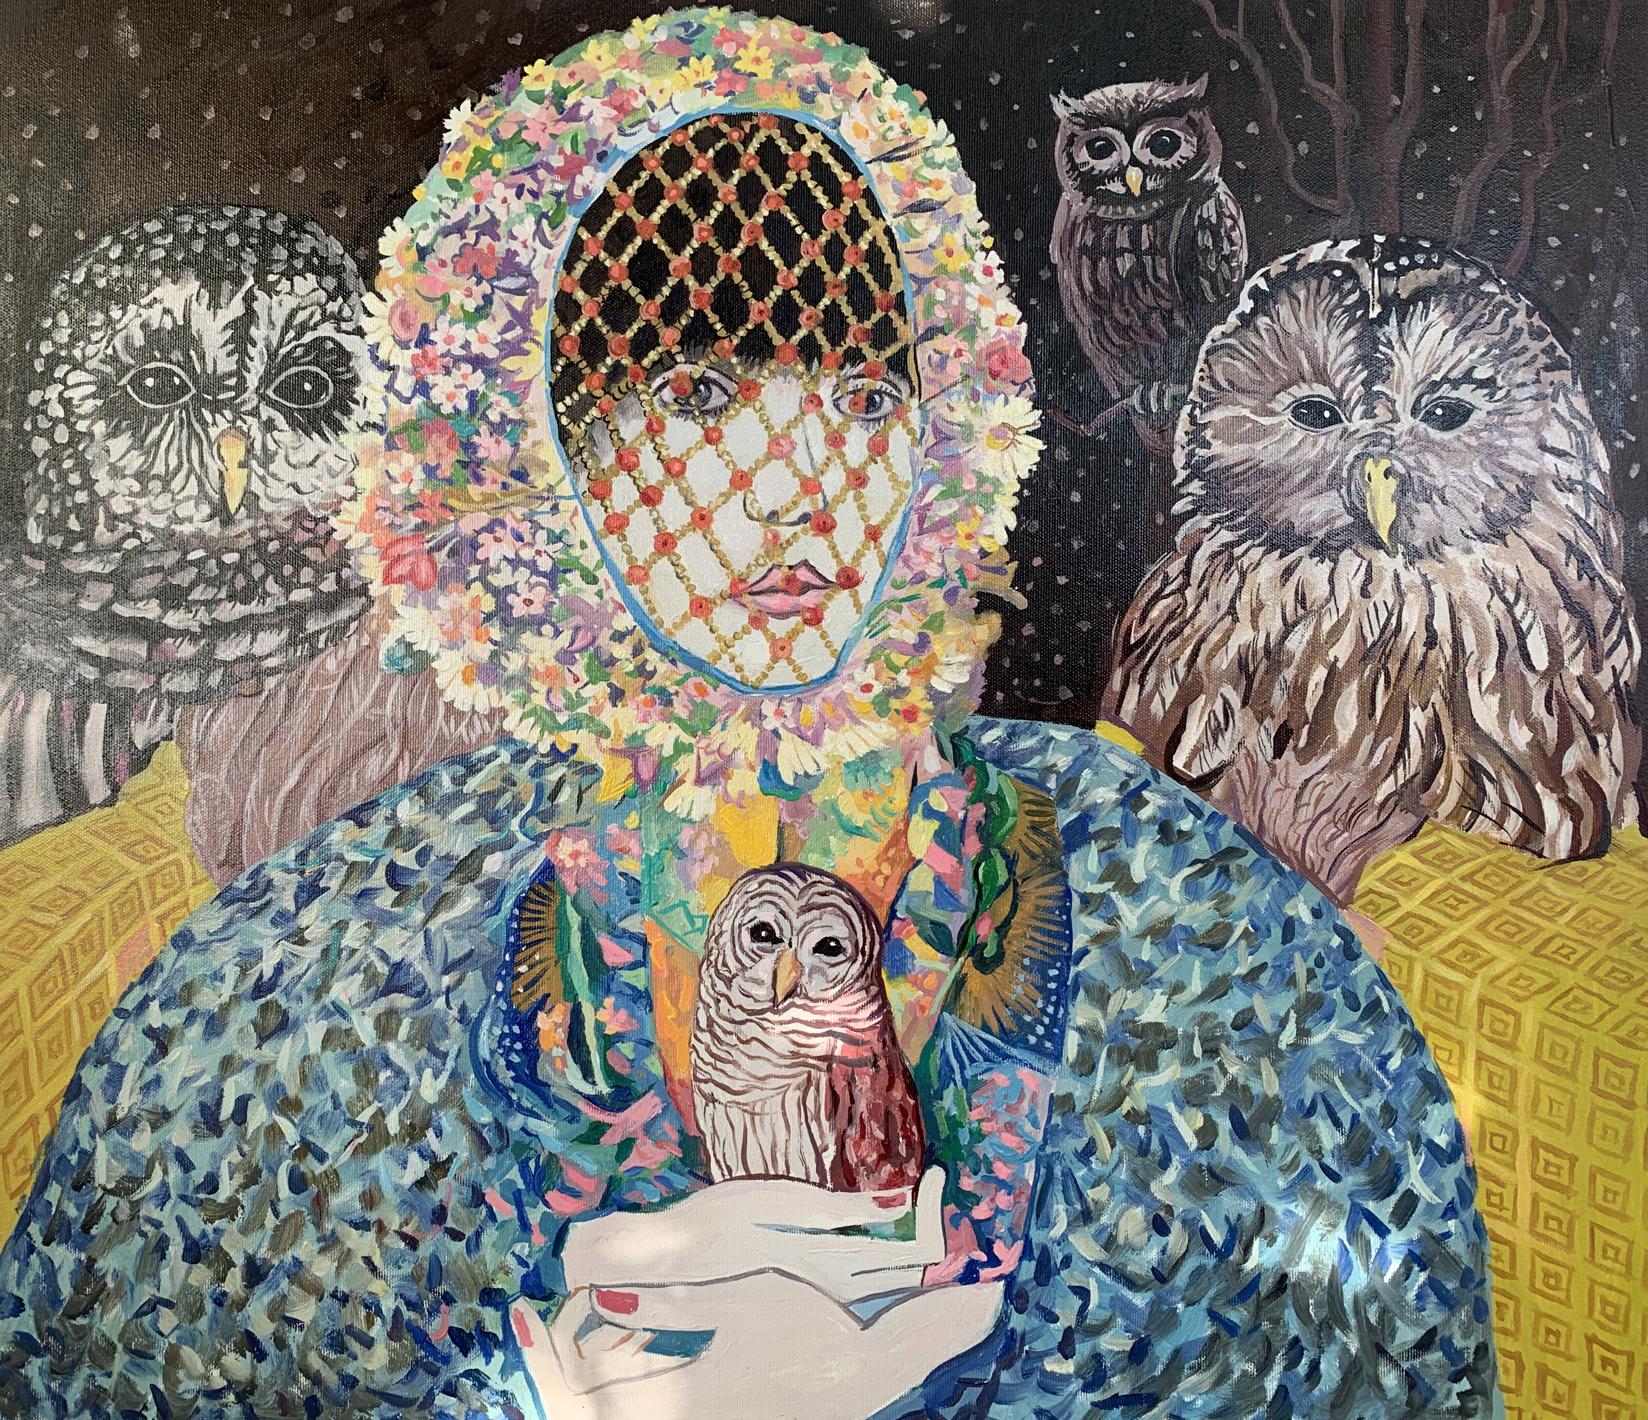 Oil painting Girl with owls V. Konotopsky